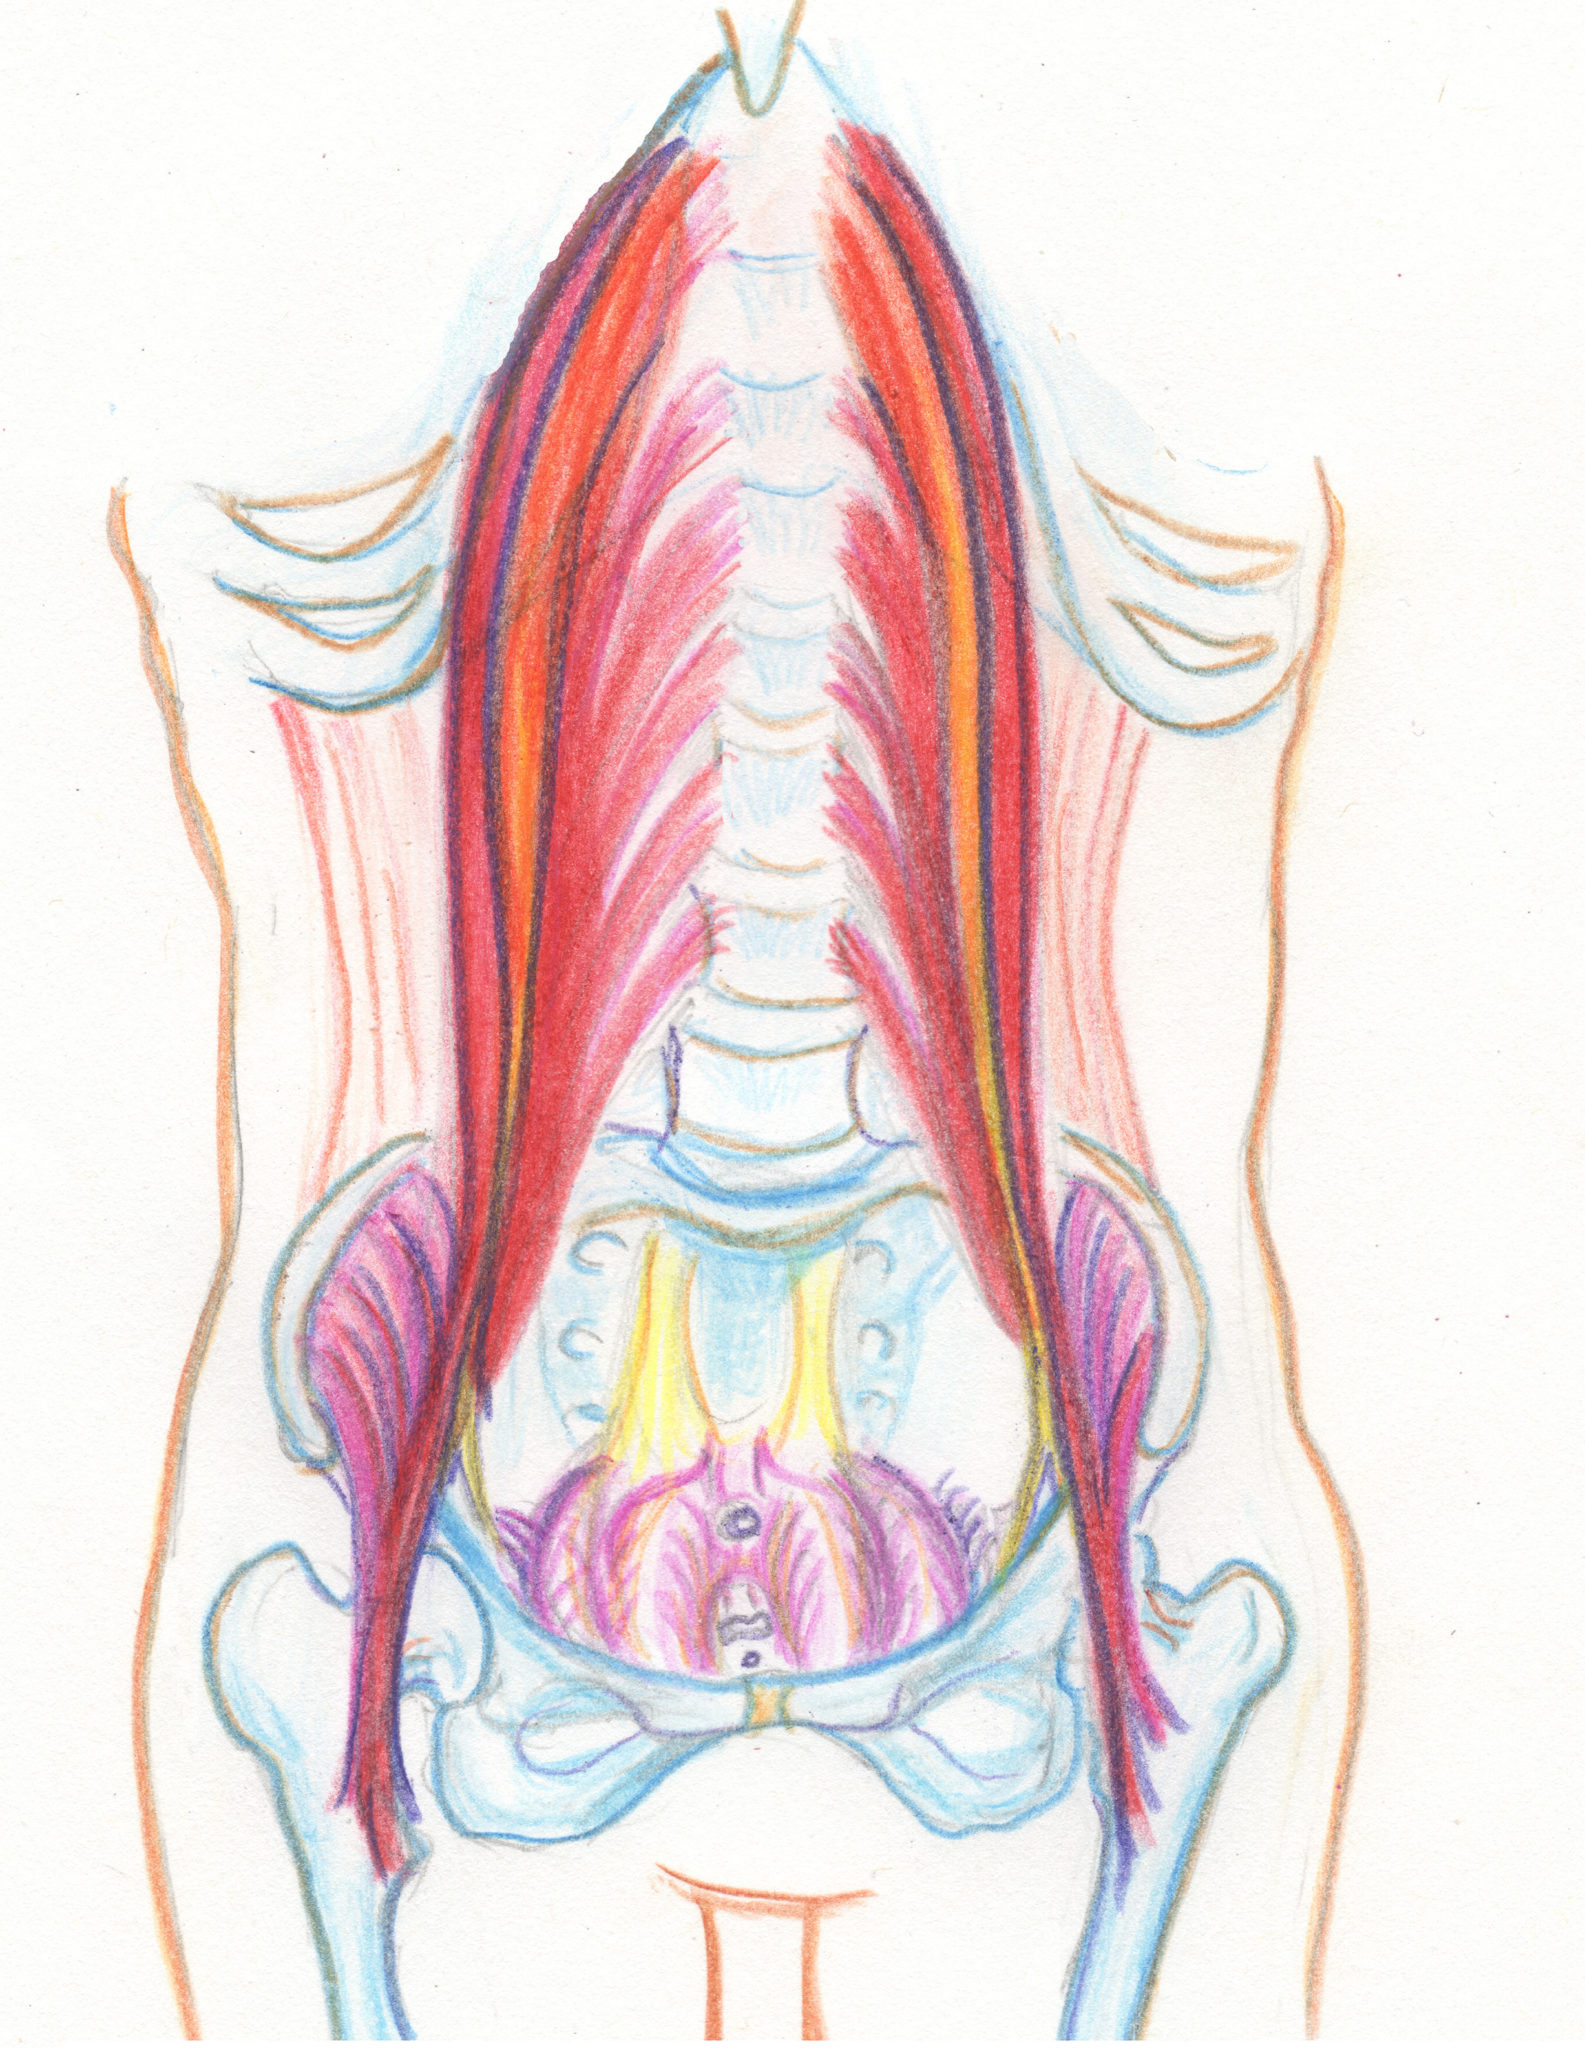 Drawing of psoas muscle pair